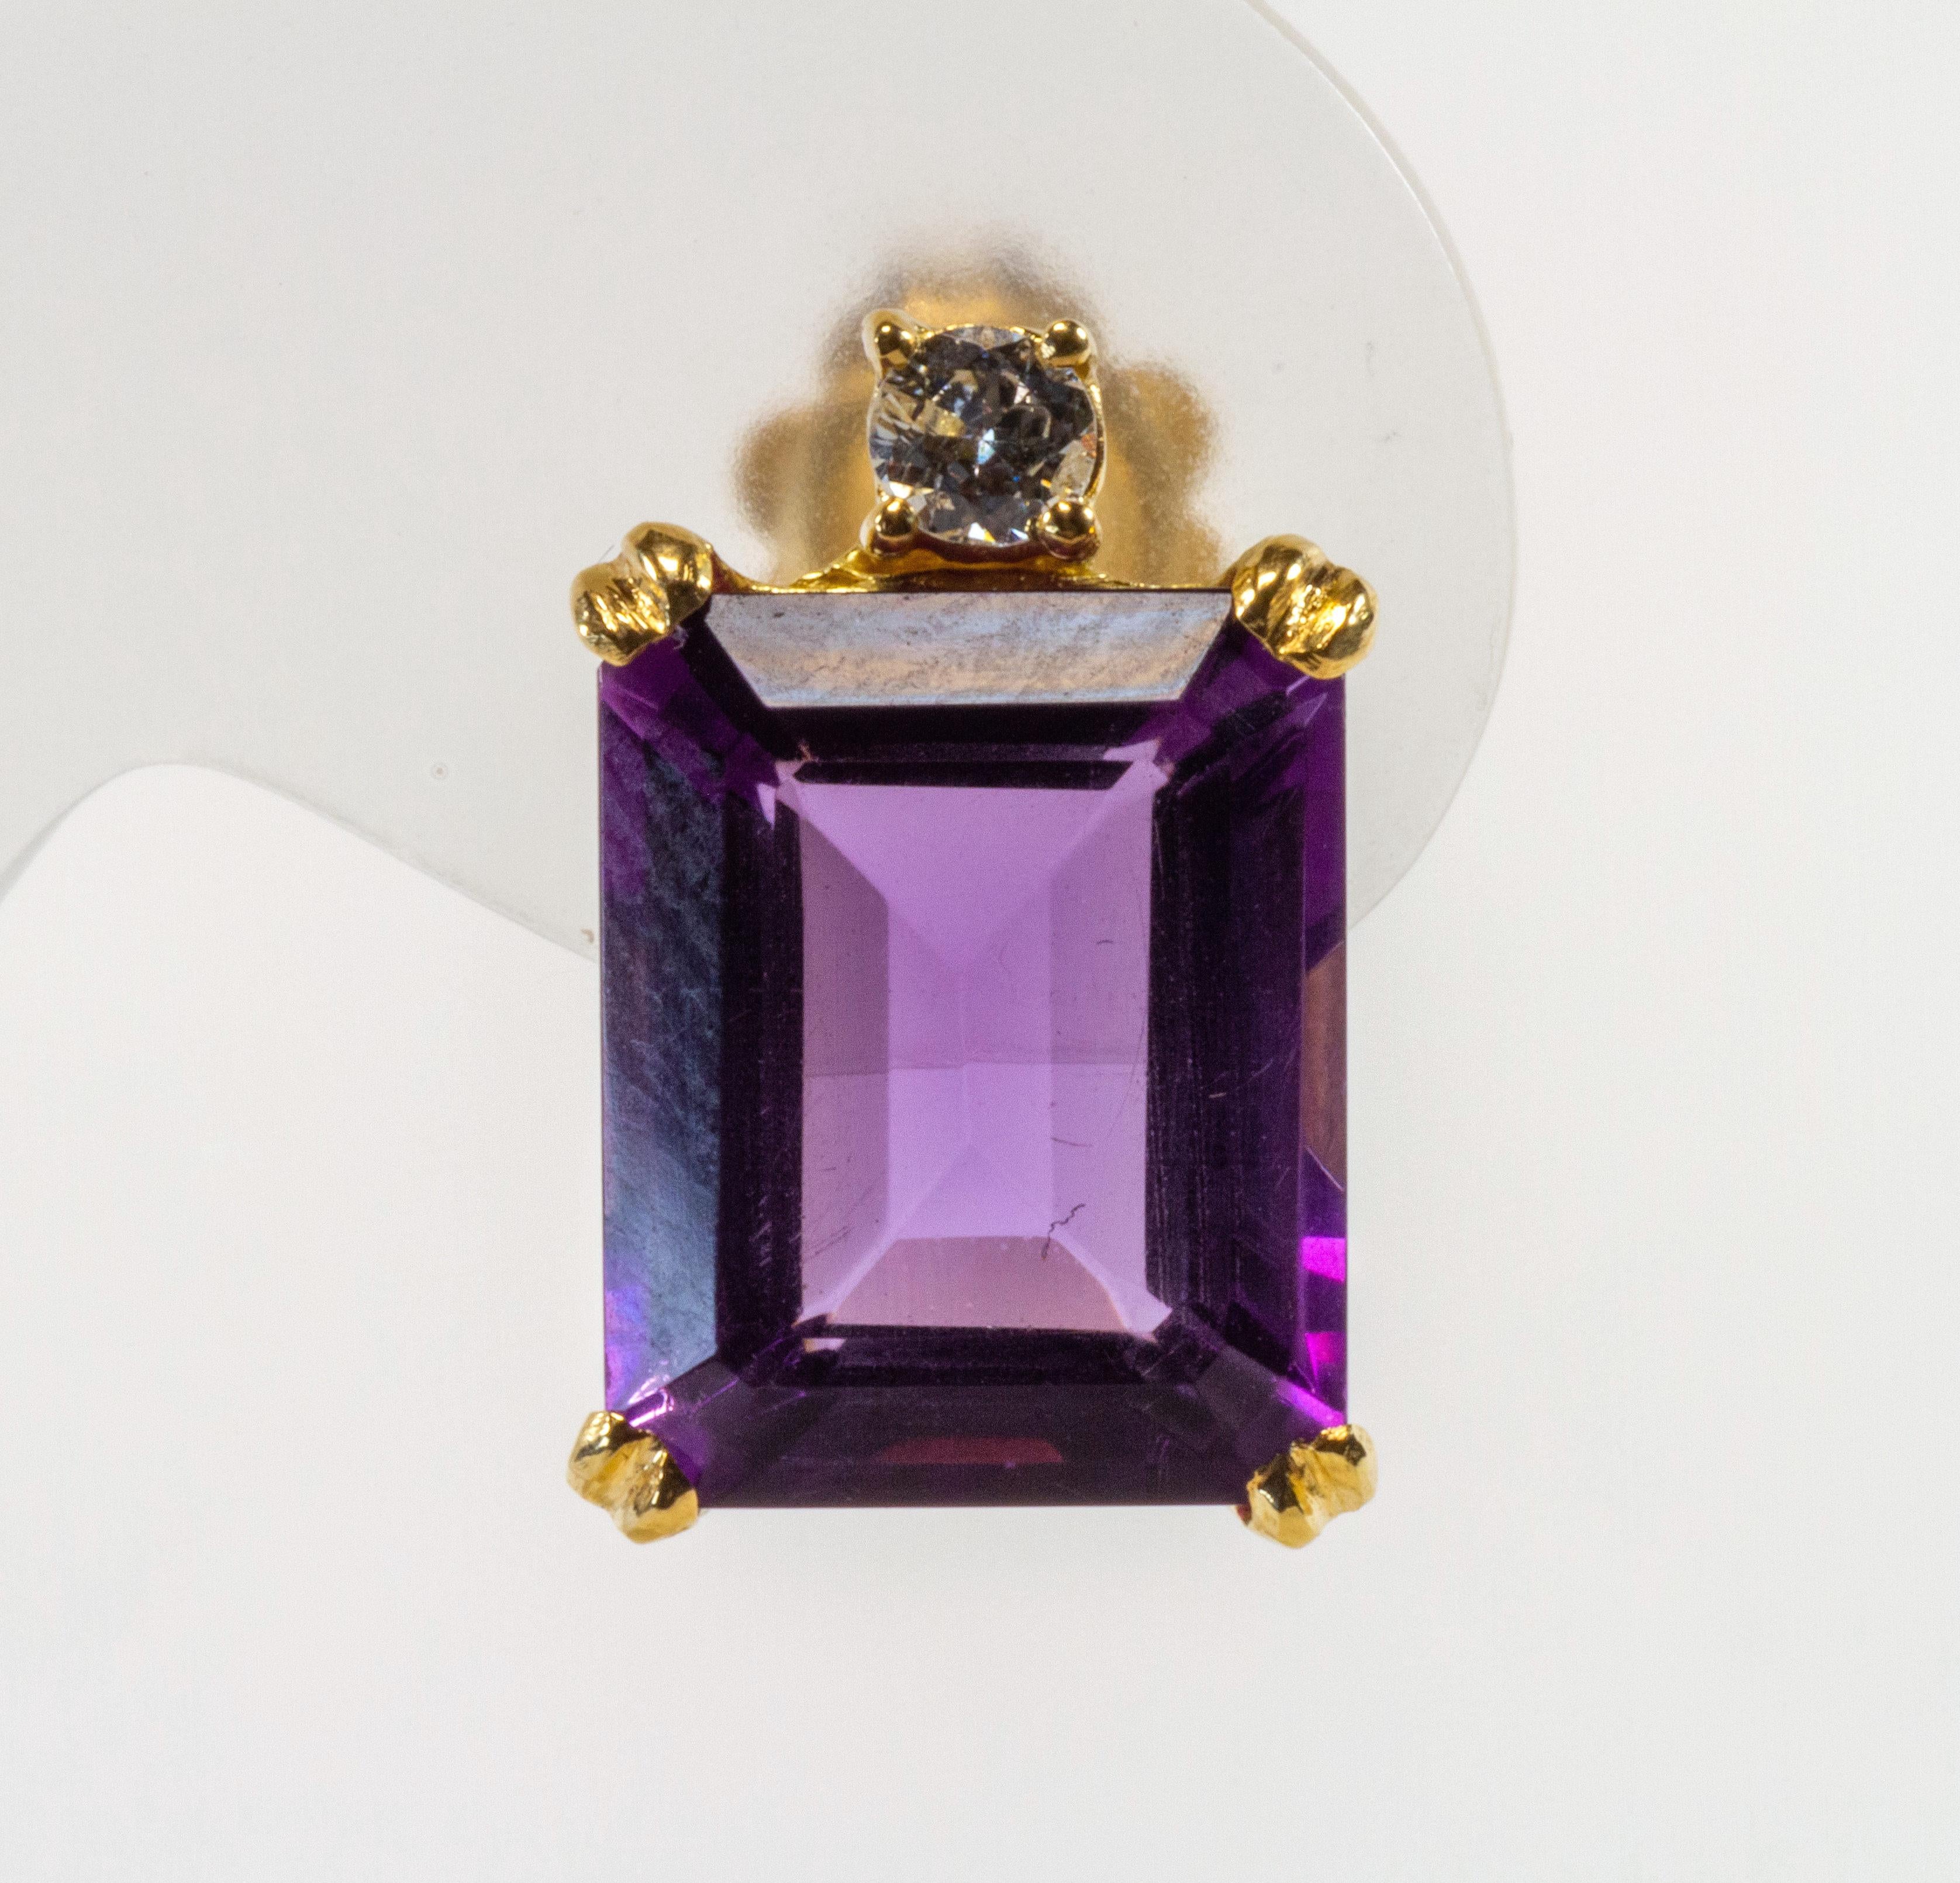 Beautiful 18-karat yellow gold earrings with emerald-cut amethysts topped with a diamond.
The earrings contain:
- 2 amethysts, emerald cut, deep purple color, dimensions 12 mm x 10 mm, total carats 7.2 approx
- 2 natural diamonds, brilliant cut,